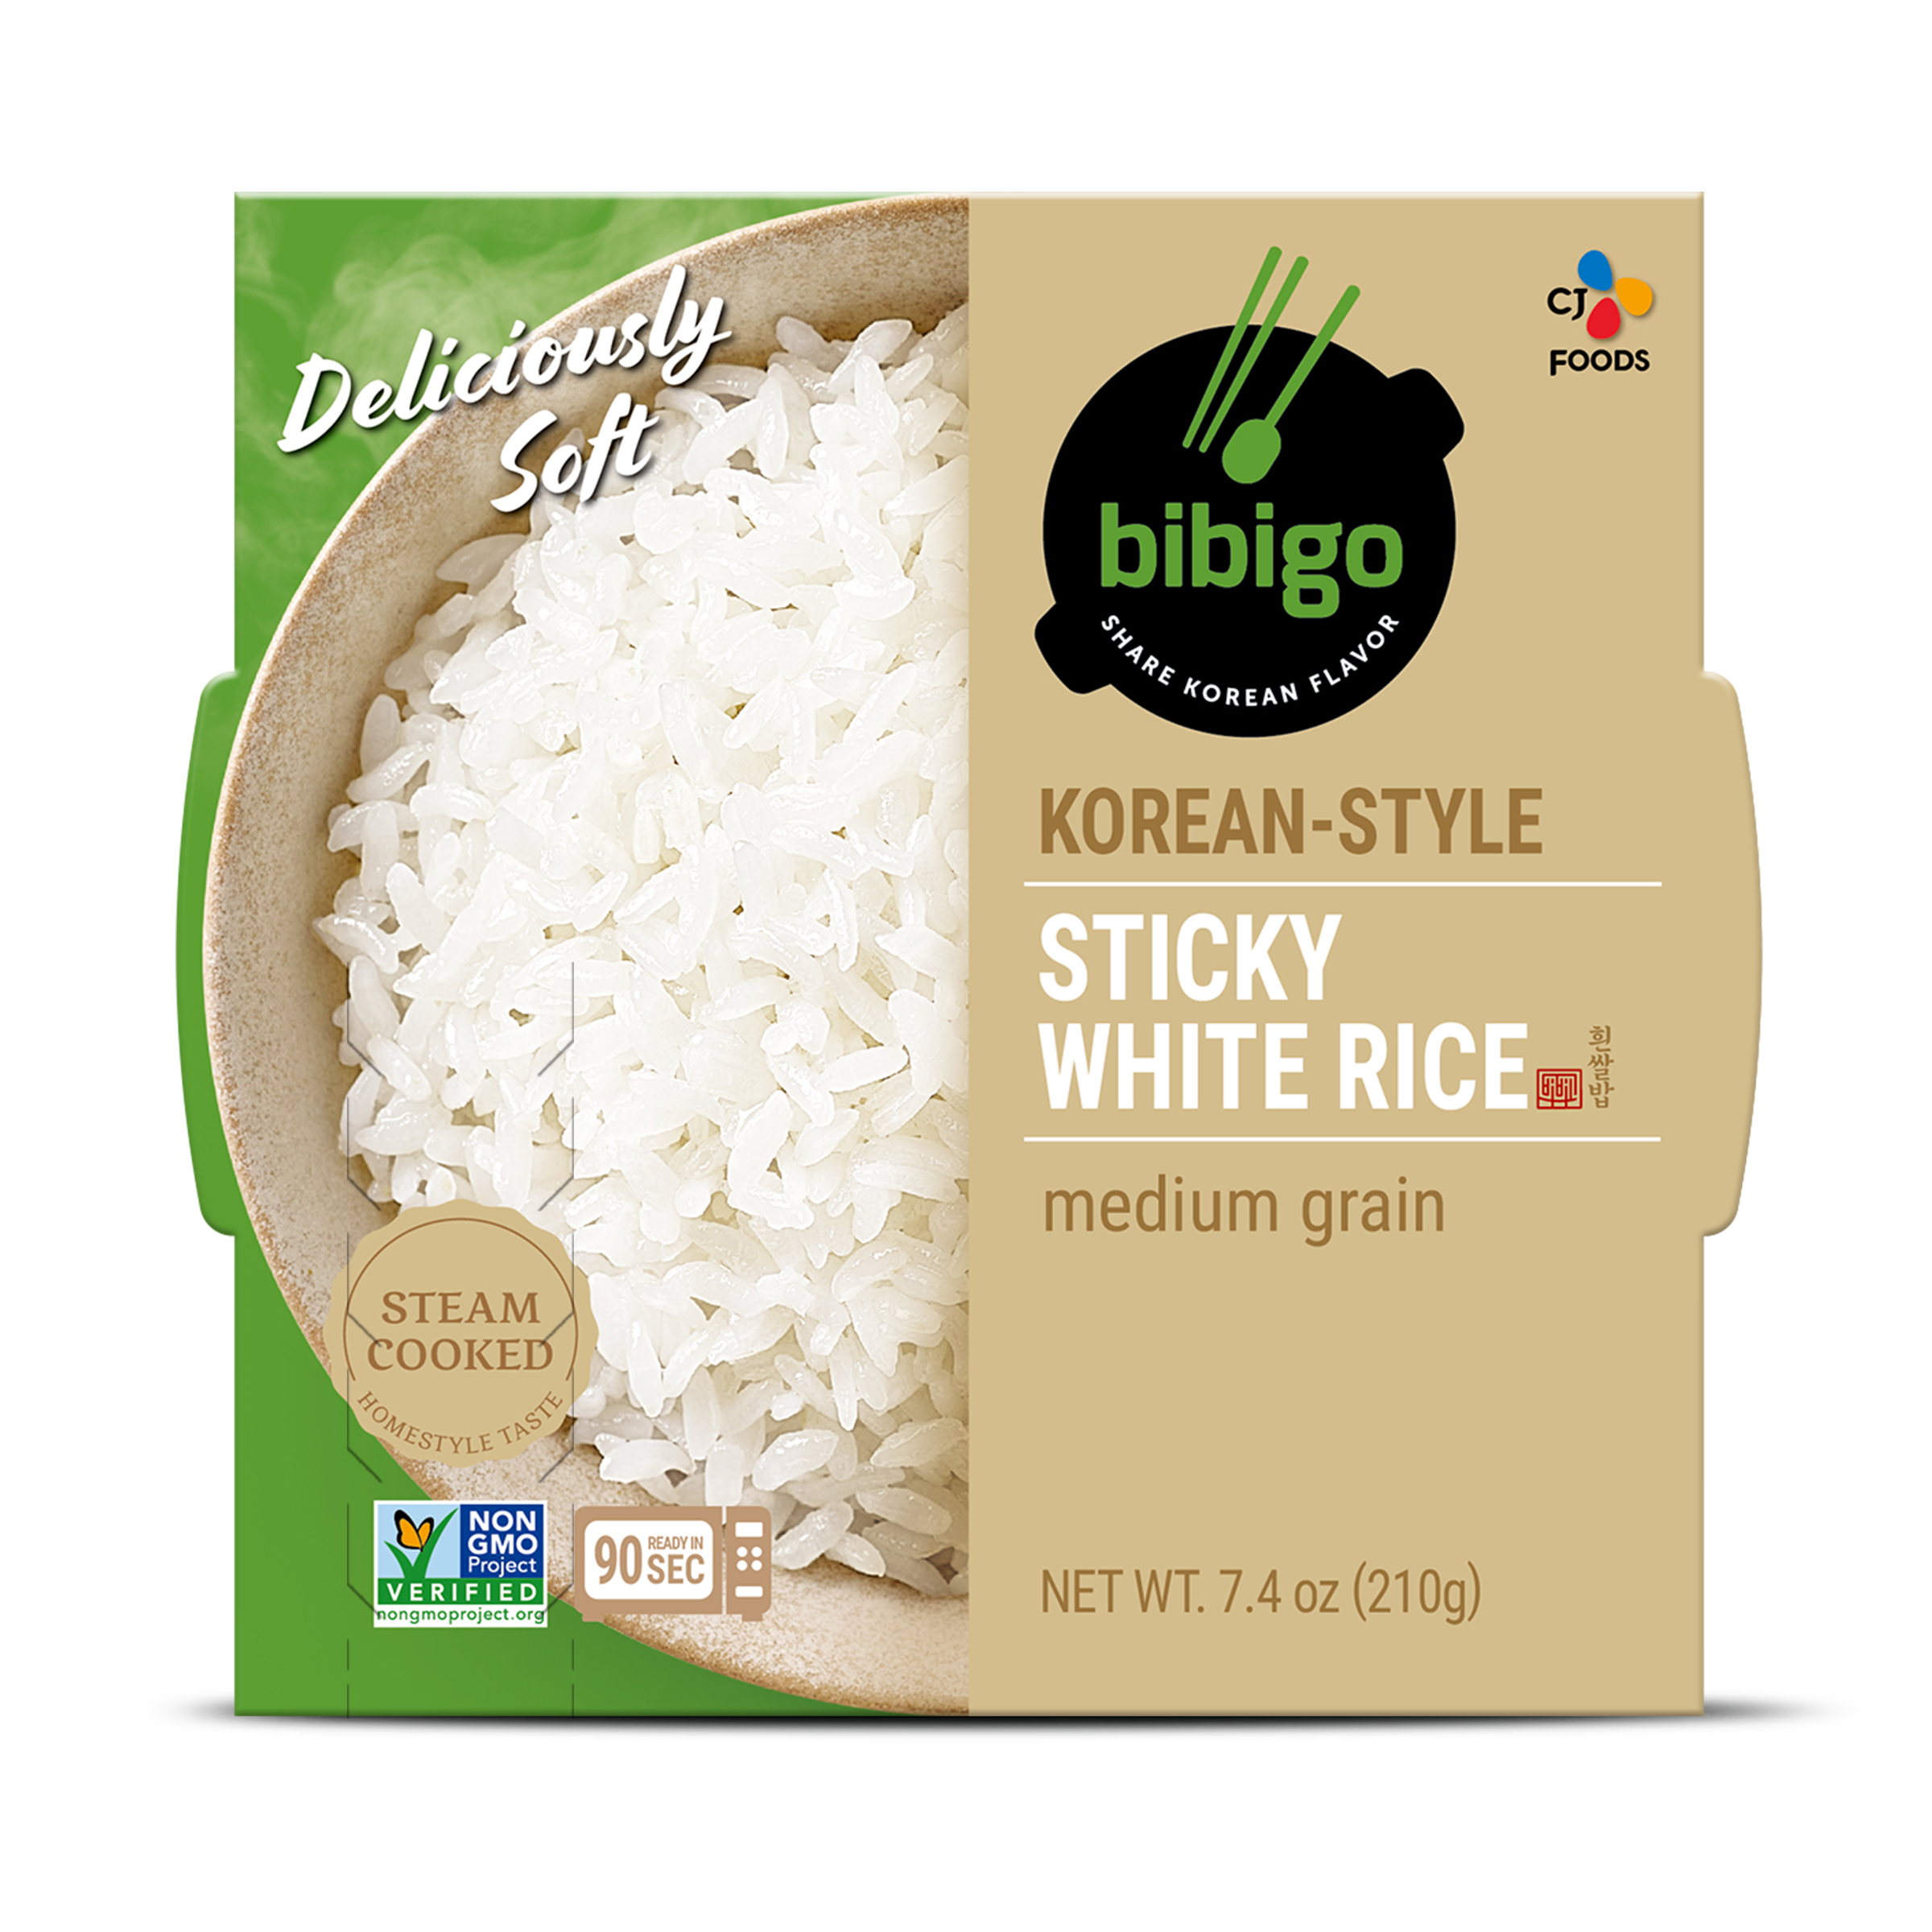 Minute Ready To Serve White Rice, 2 ct